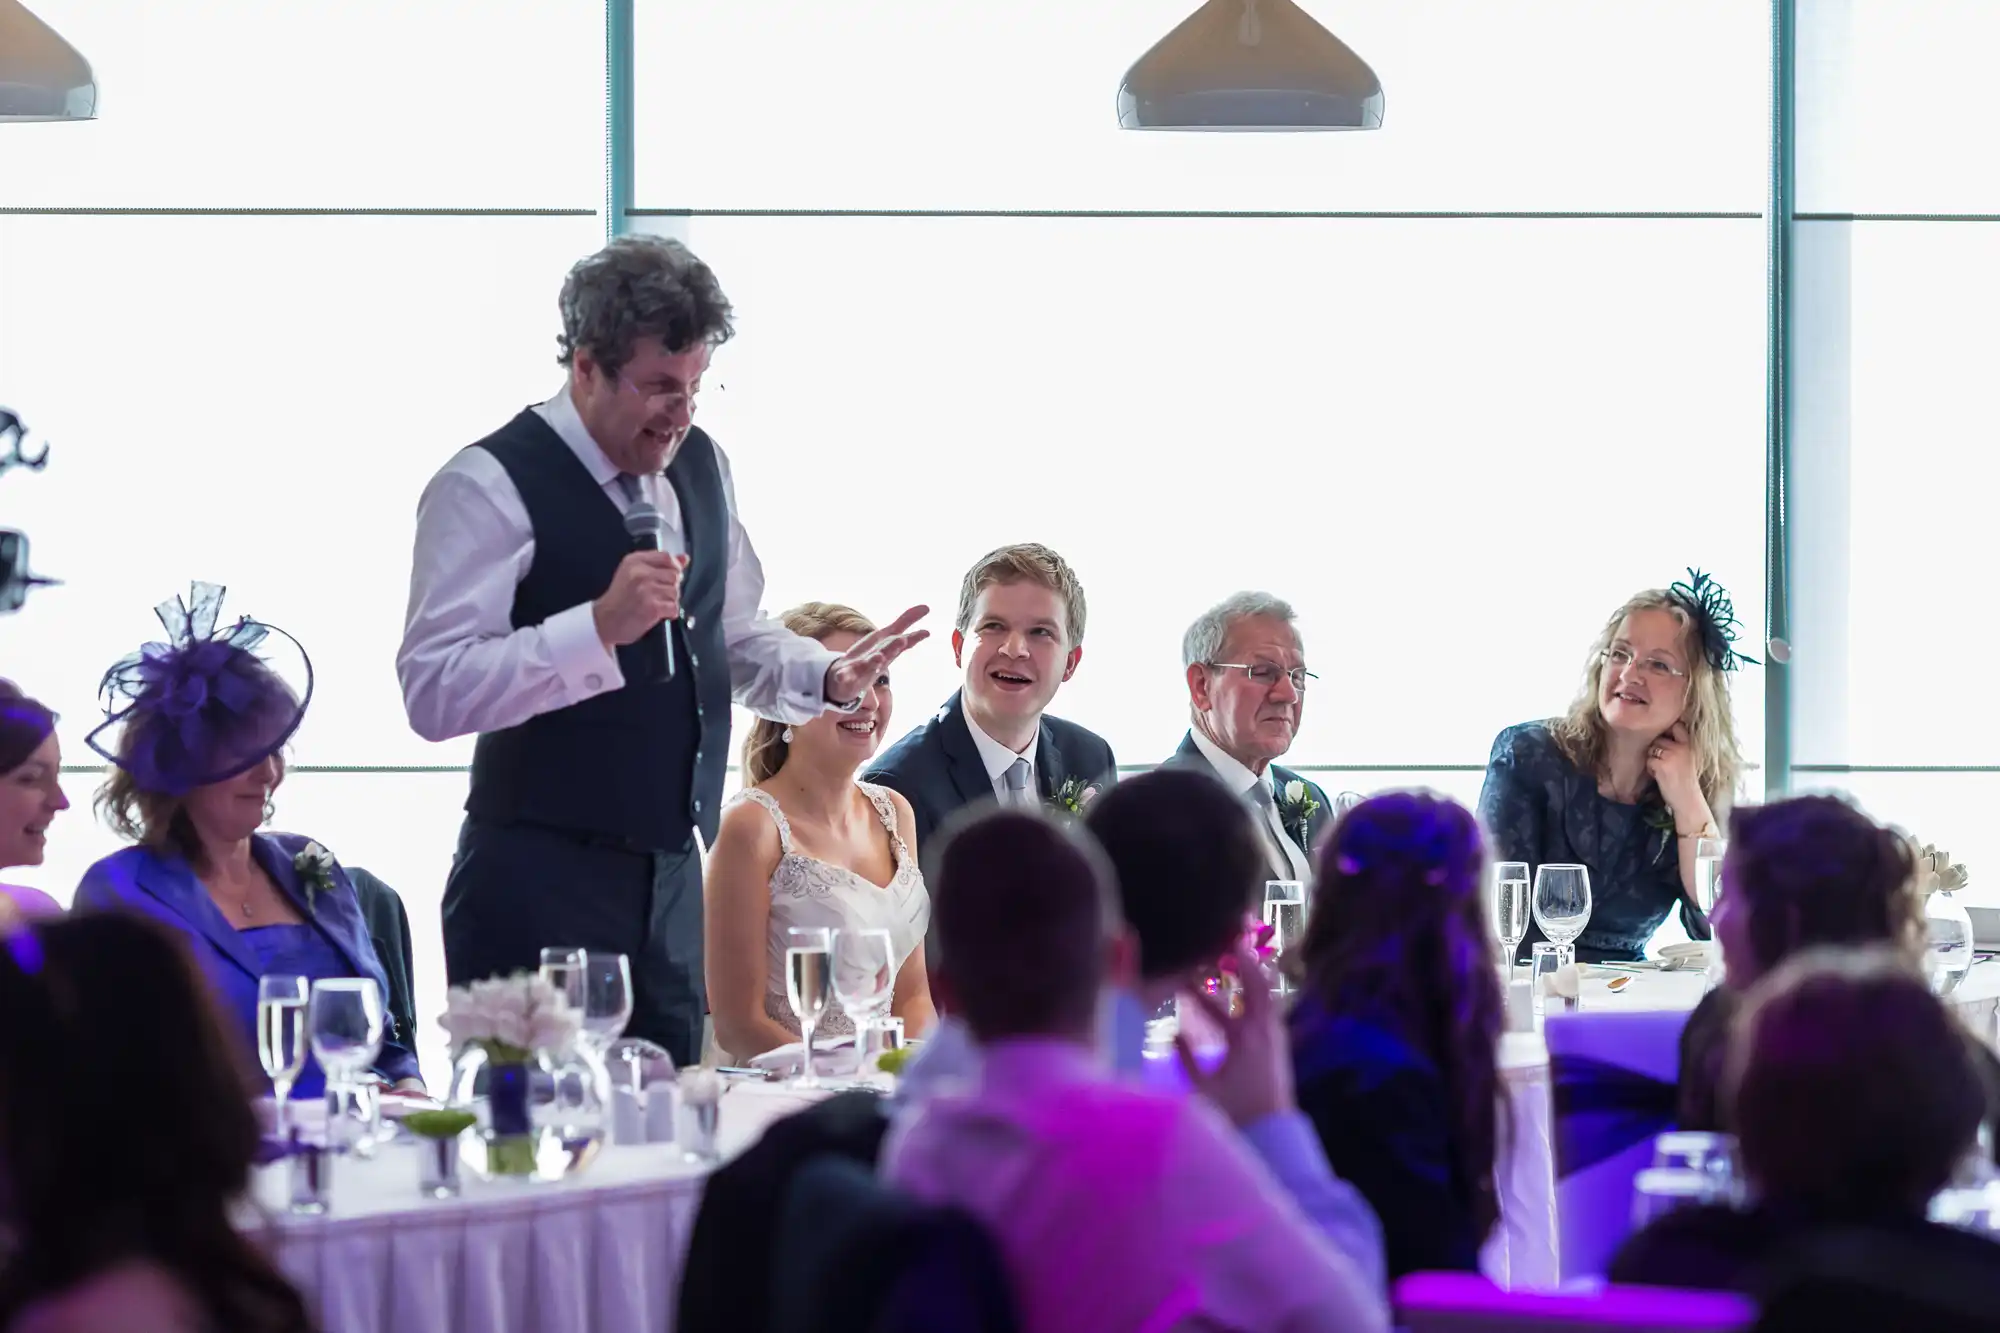 A man gives a speech at a wedding reception, standing beside a bride and groom at a table, with guests listening attentively.